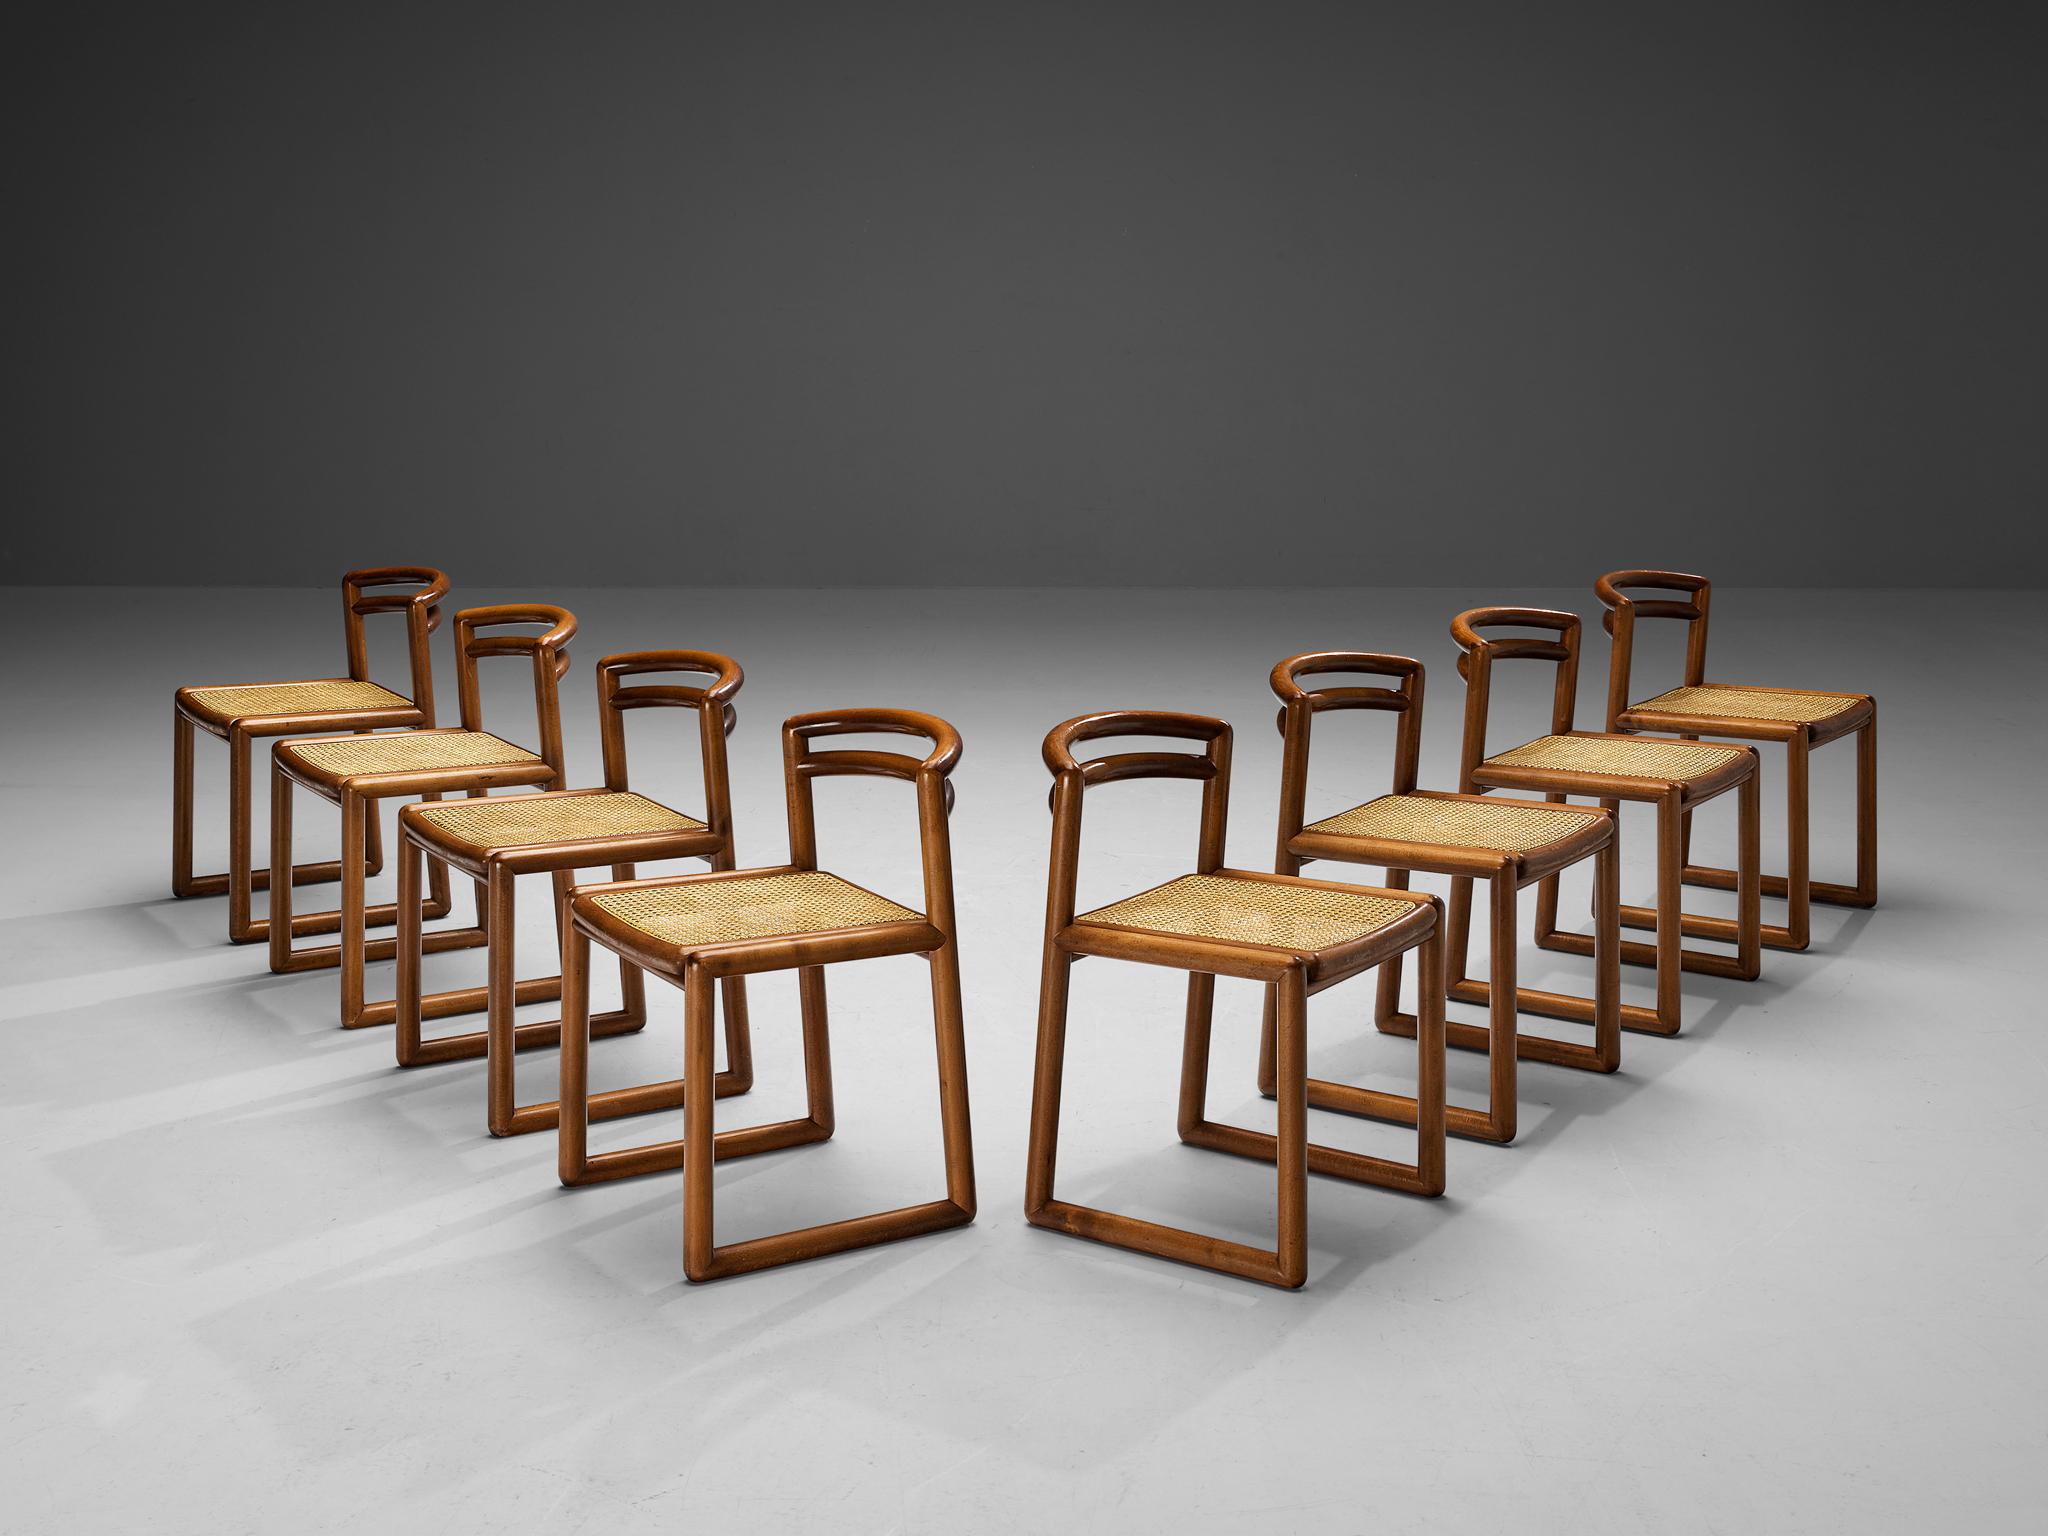 Set of eight dining chairs, dark lacquered beech, cane, Italy, 1970s. 

Set of eight quirky Italian dining chairs. These chairs feature a lacquered wooden frame with a modest gloss finish that brings out the grain pattern in an elegant manner. The